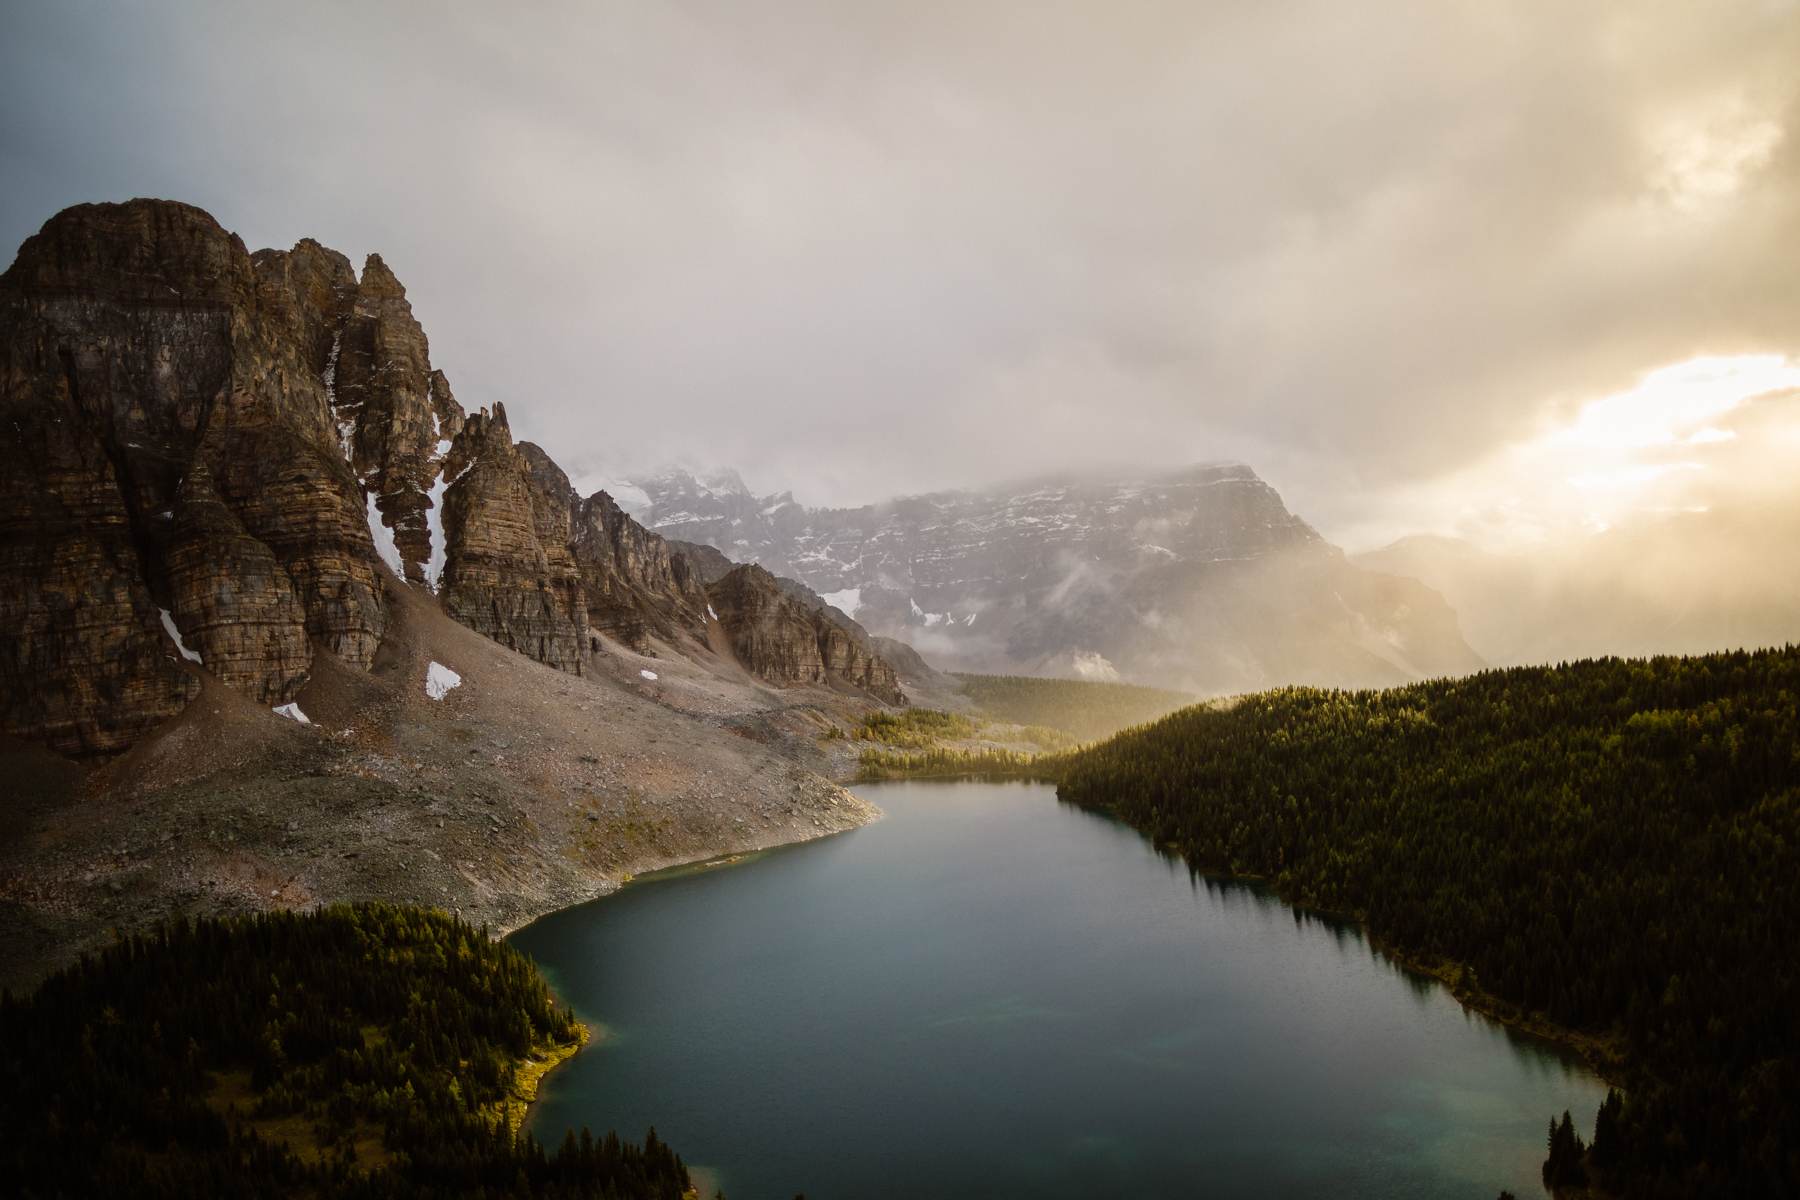 Mount Assiniboine Elopement Photographers at a Backcountry Lodge - Photo 30